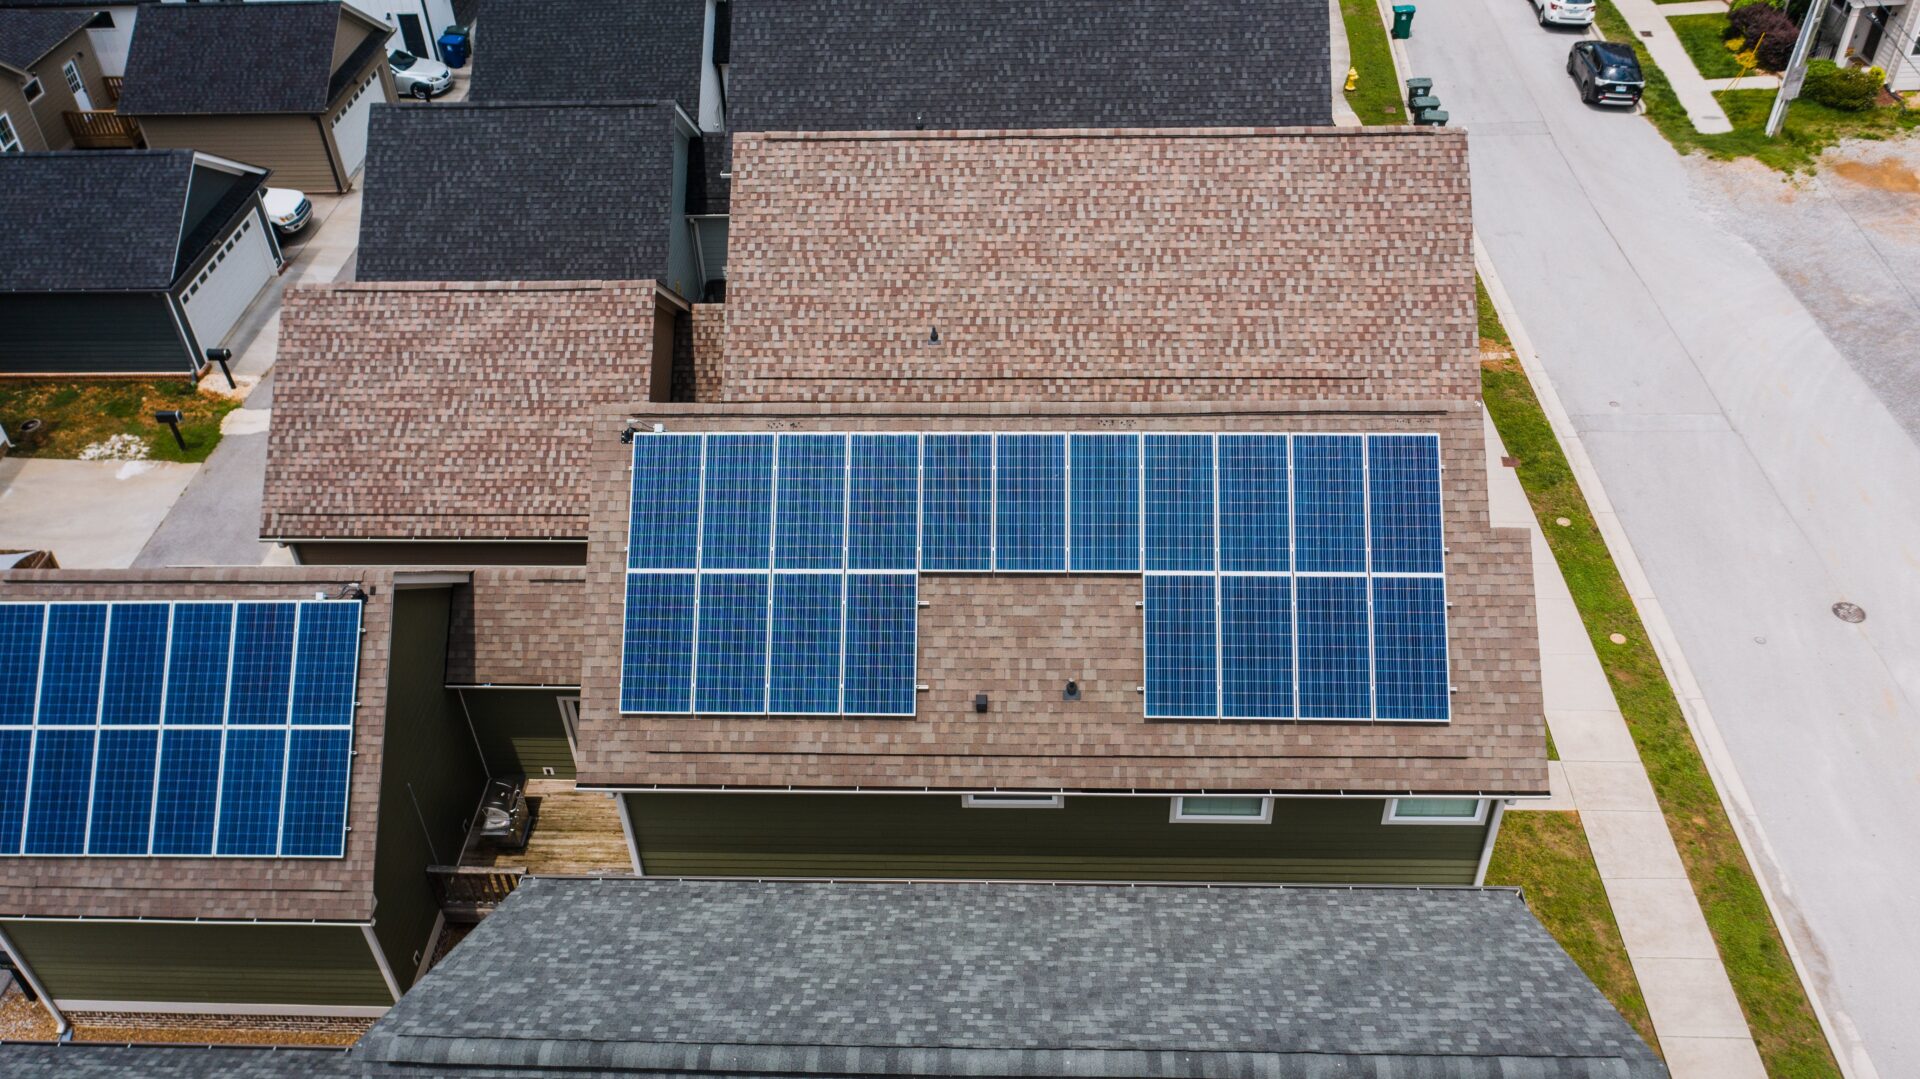 shows solar panels that have been installed on the roof of a house